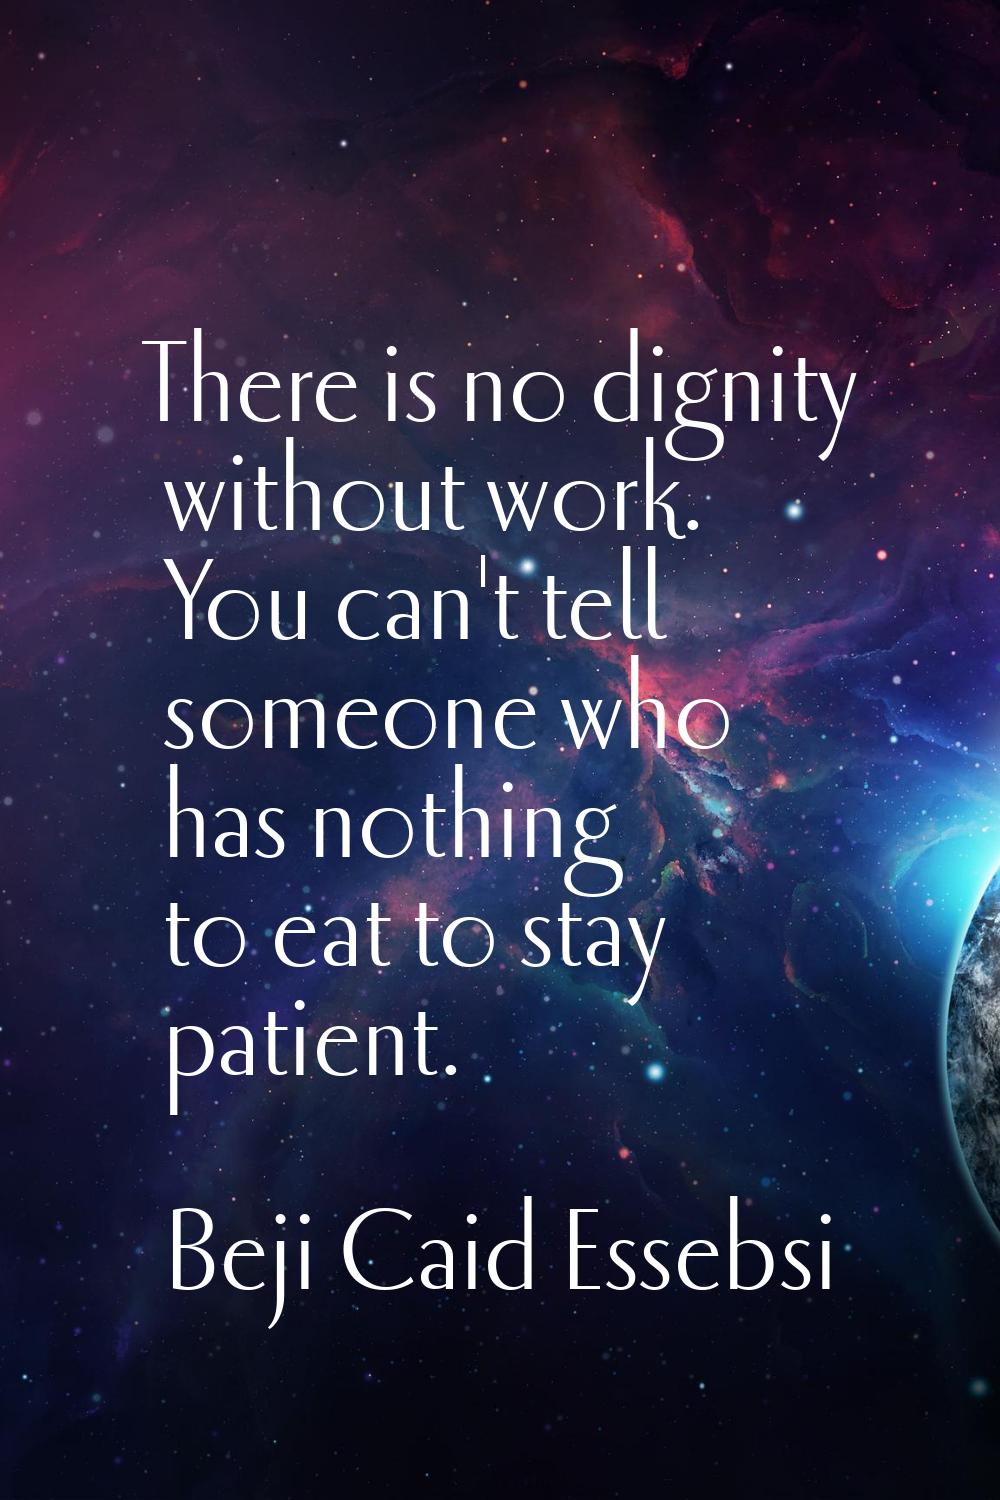 There is no dignity without work. You can't tell someone who has nothing to eat to stay patient.